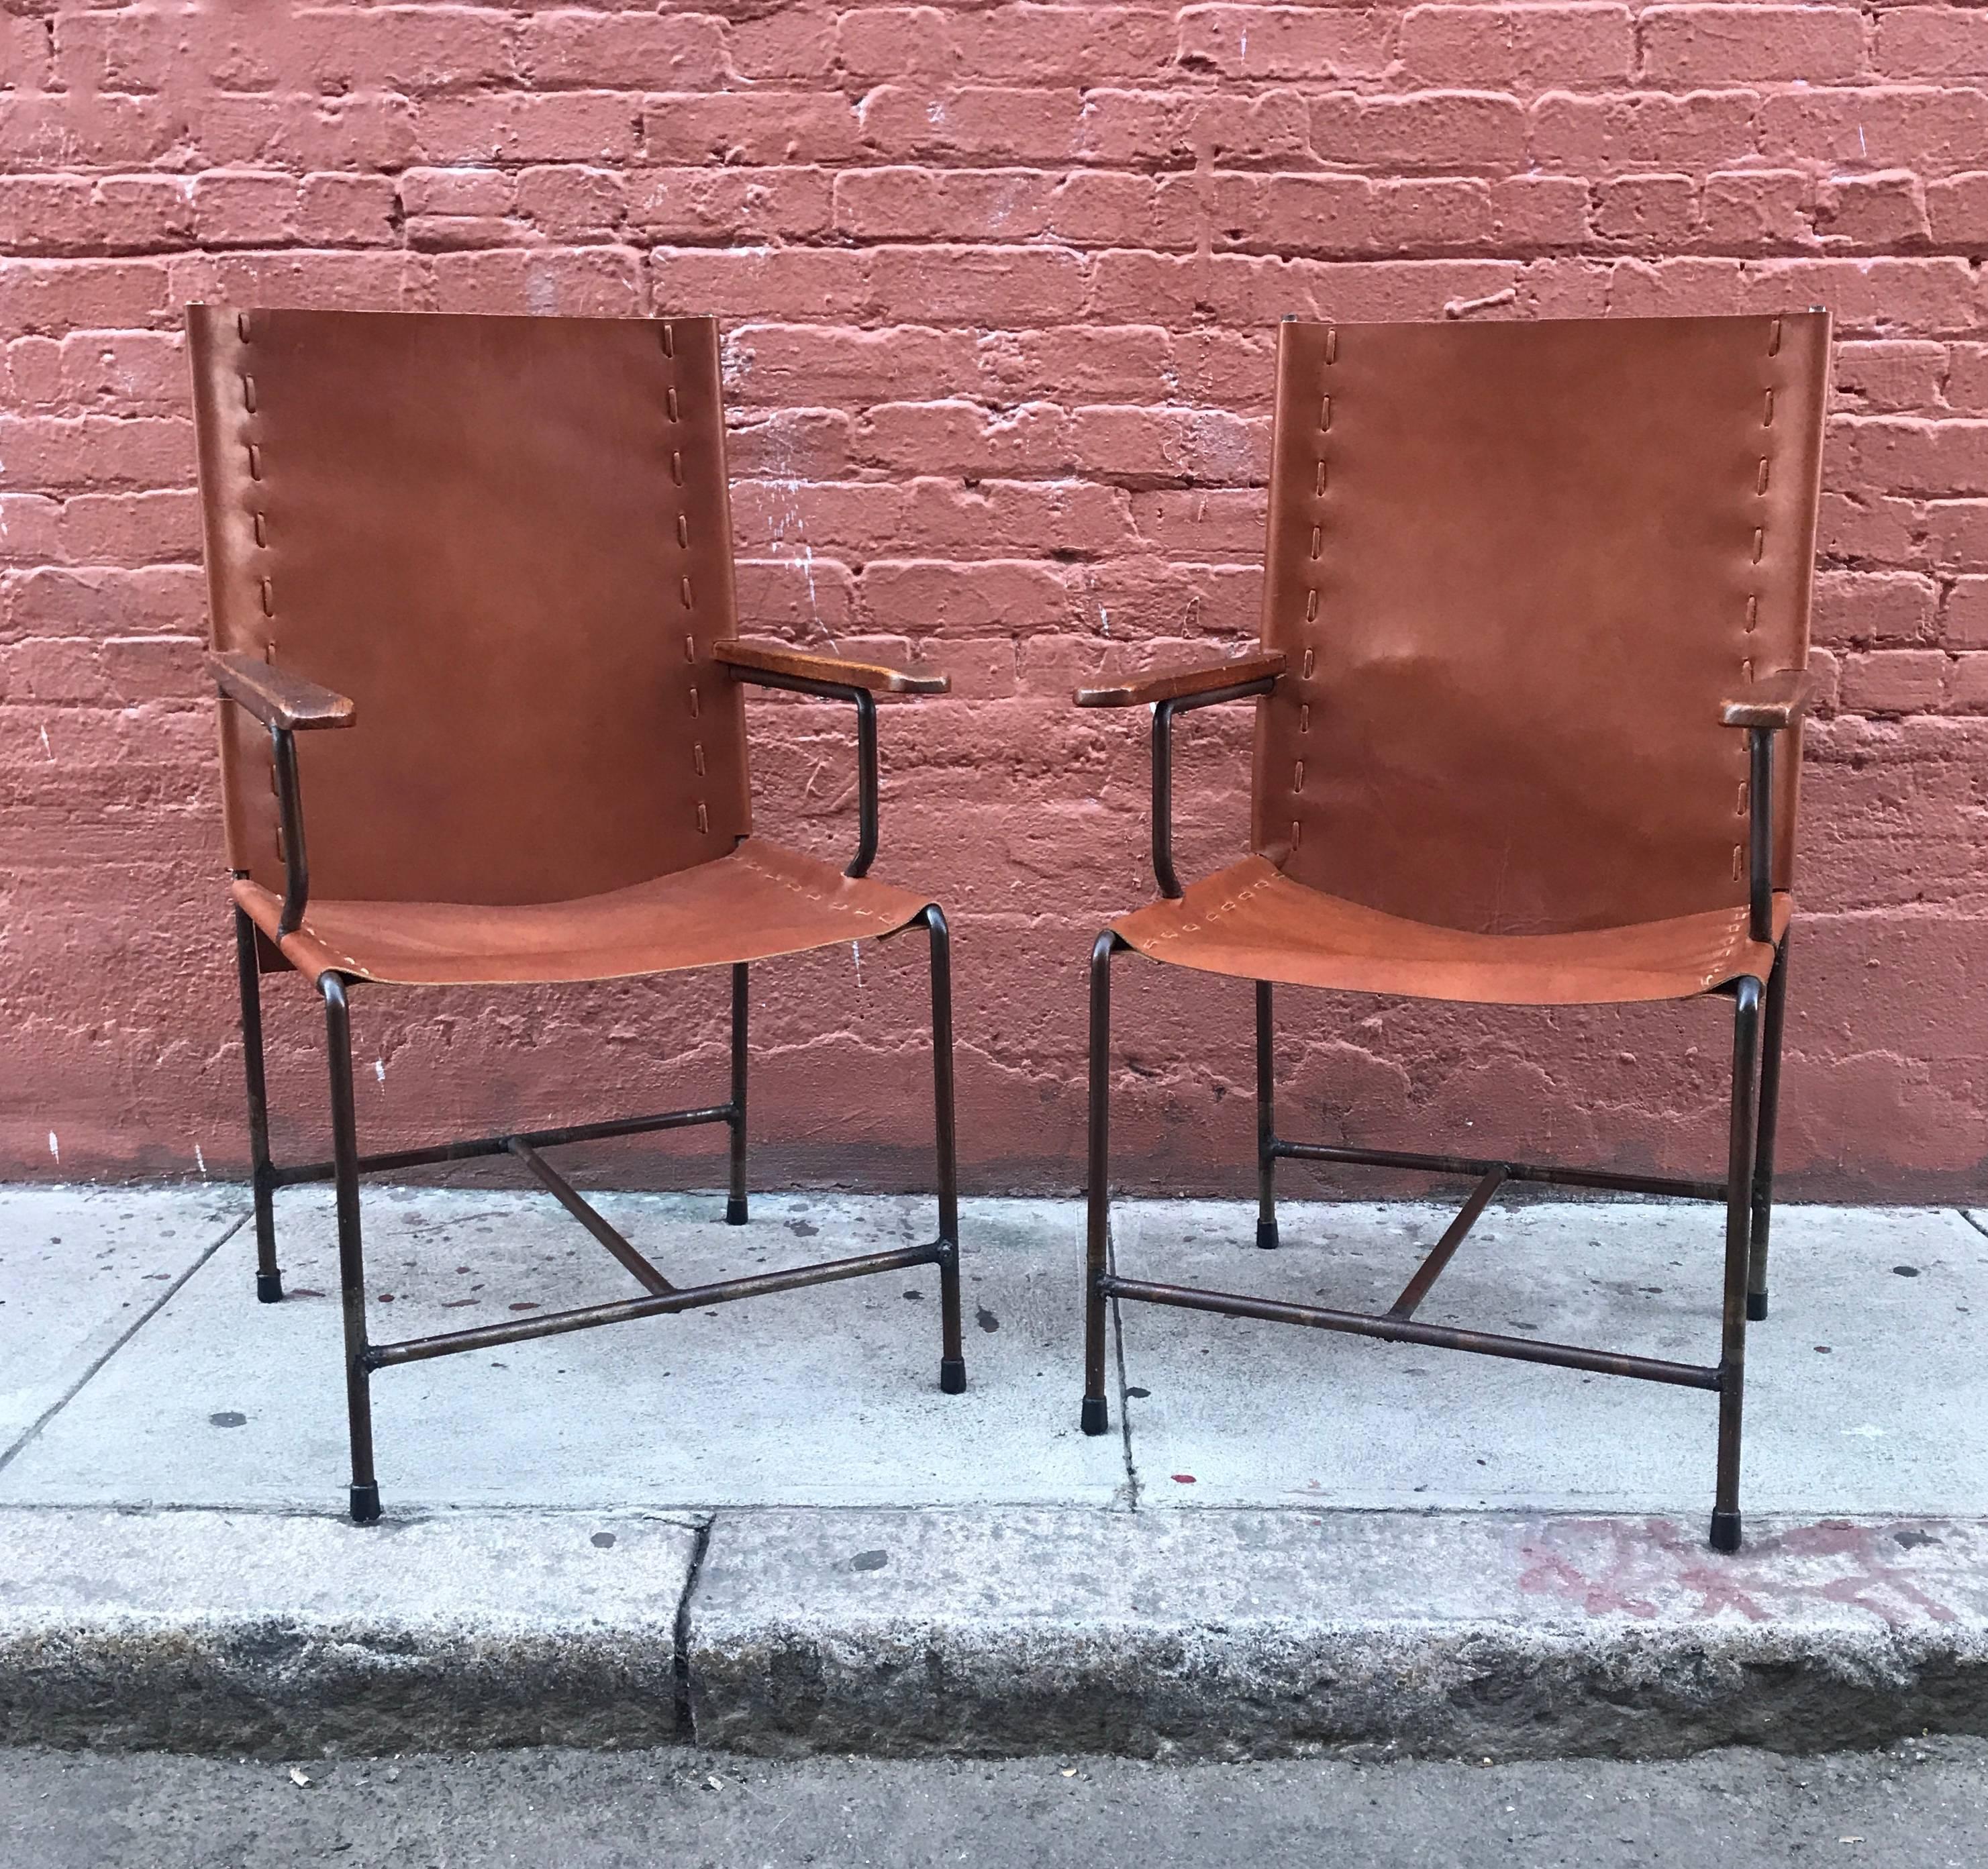 Mexican modern armchairs in leather with iron frames with wooden armrests. Created during 1950s these chairs are a blend of Rustic and Modernist design values. Newly upholstered in leather, the frames and armrests have been left in their original